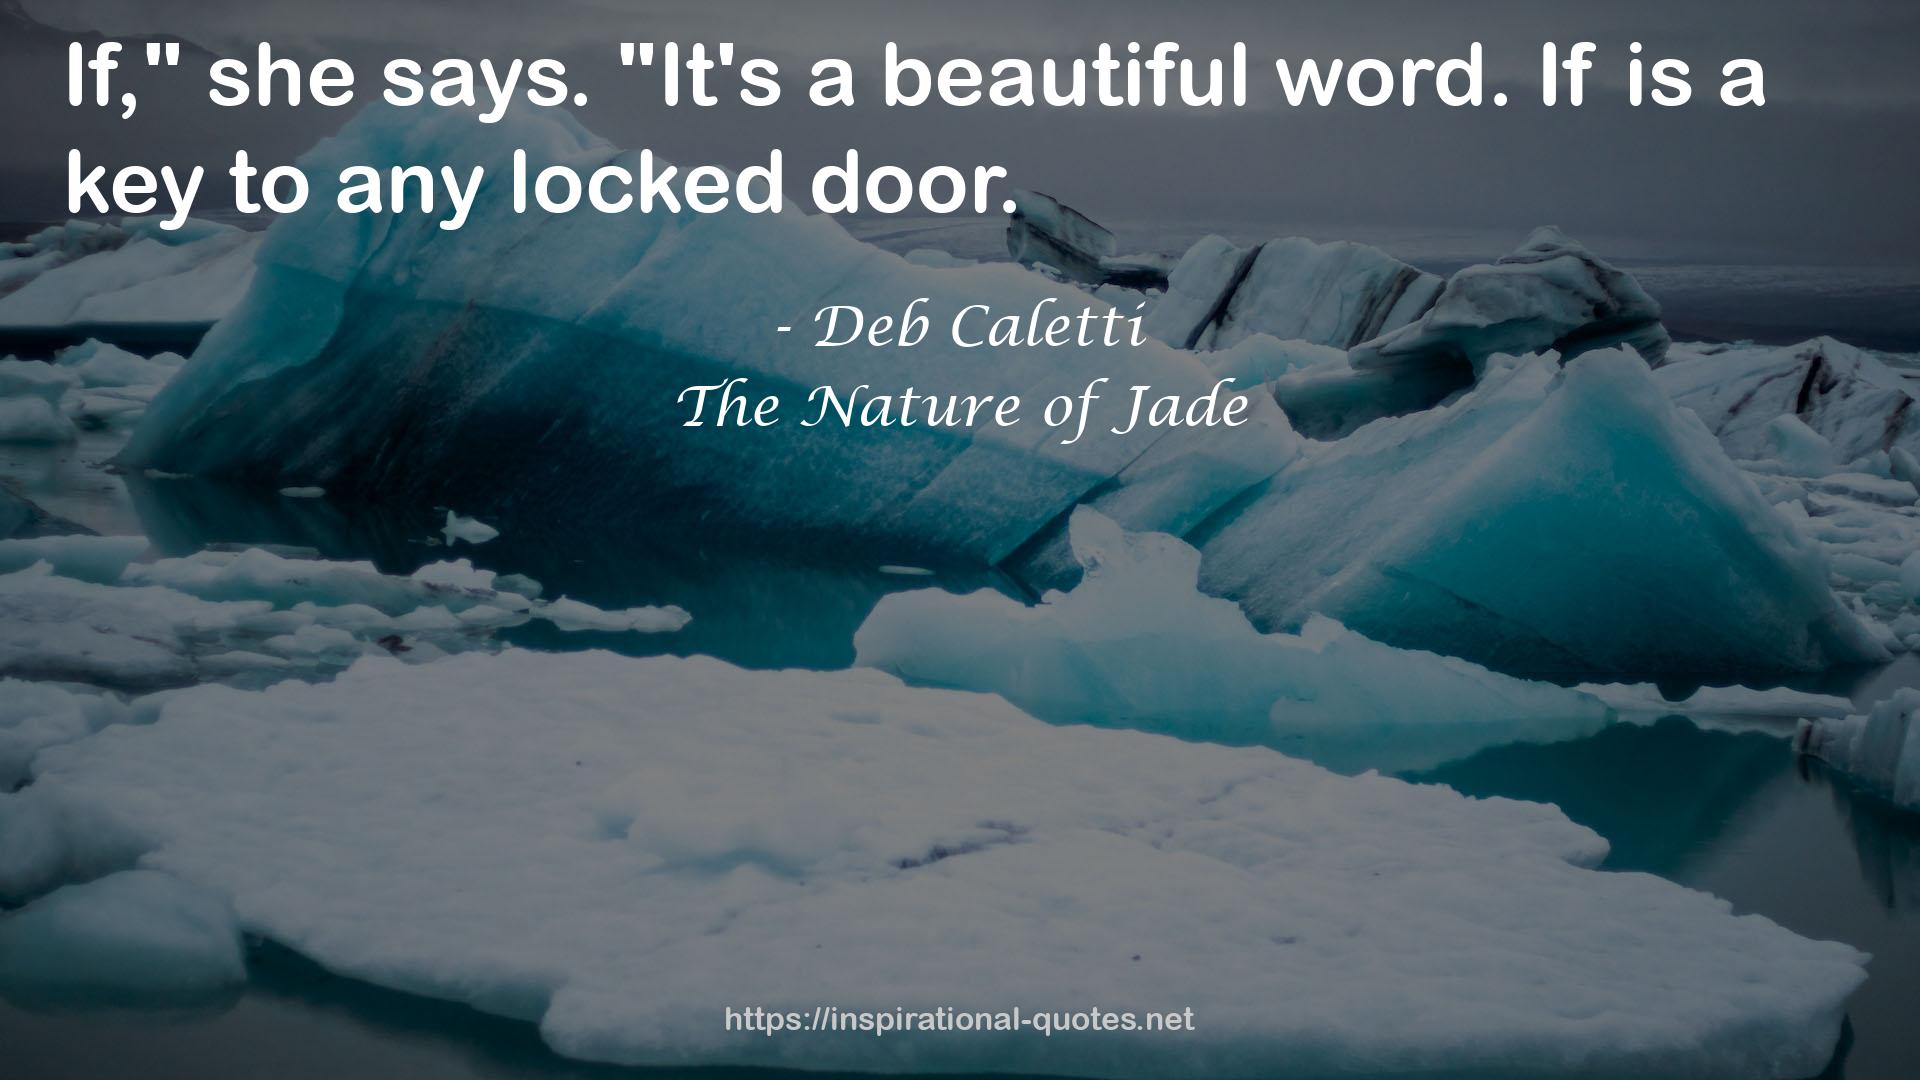 The Nature of Jade QUOTES